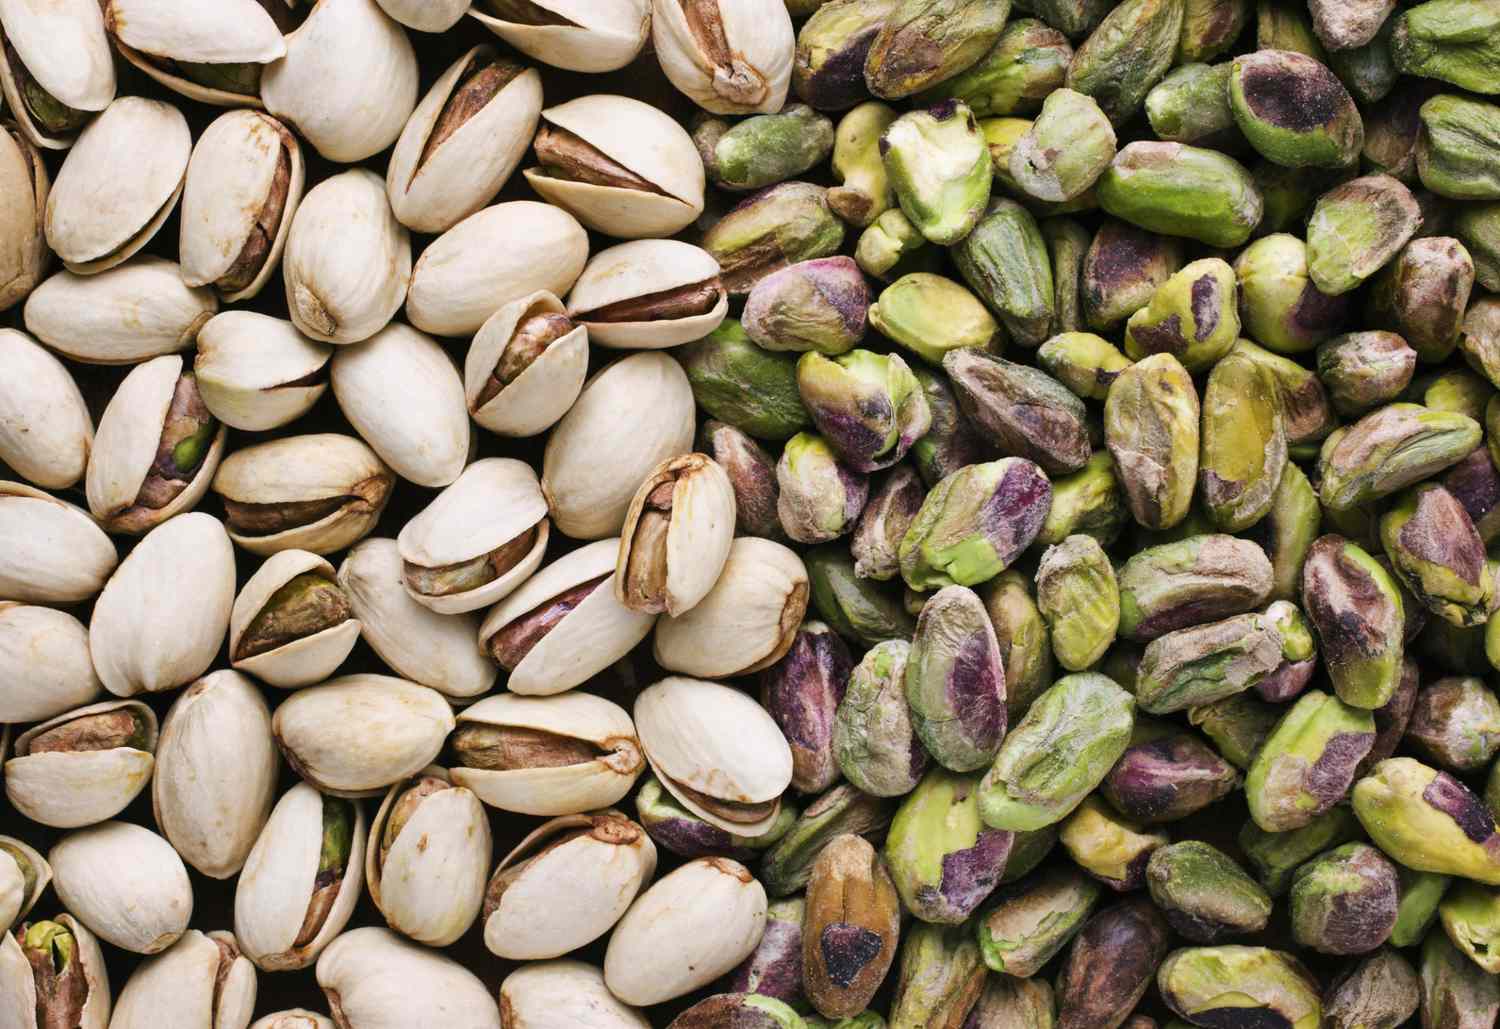 The purchase price of pistachio kernels Woolworths + properties, disadvantages and advantages